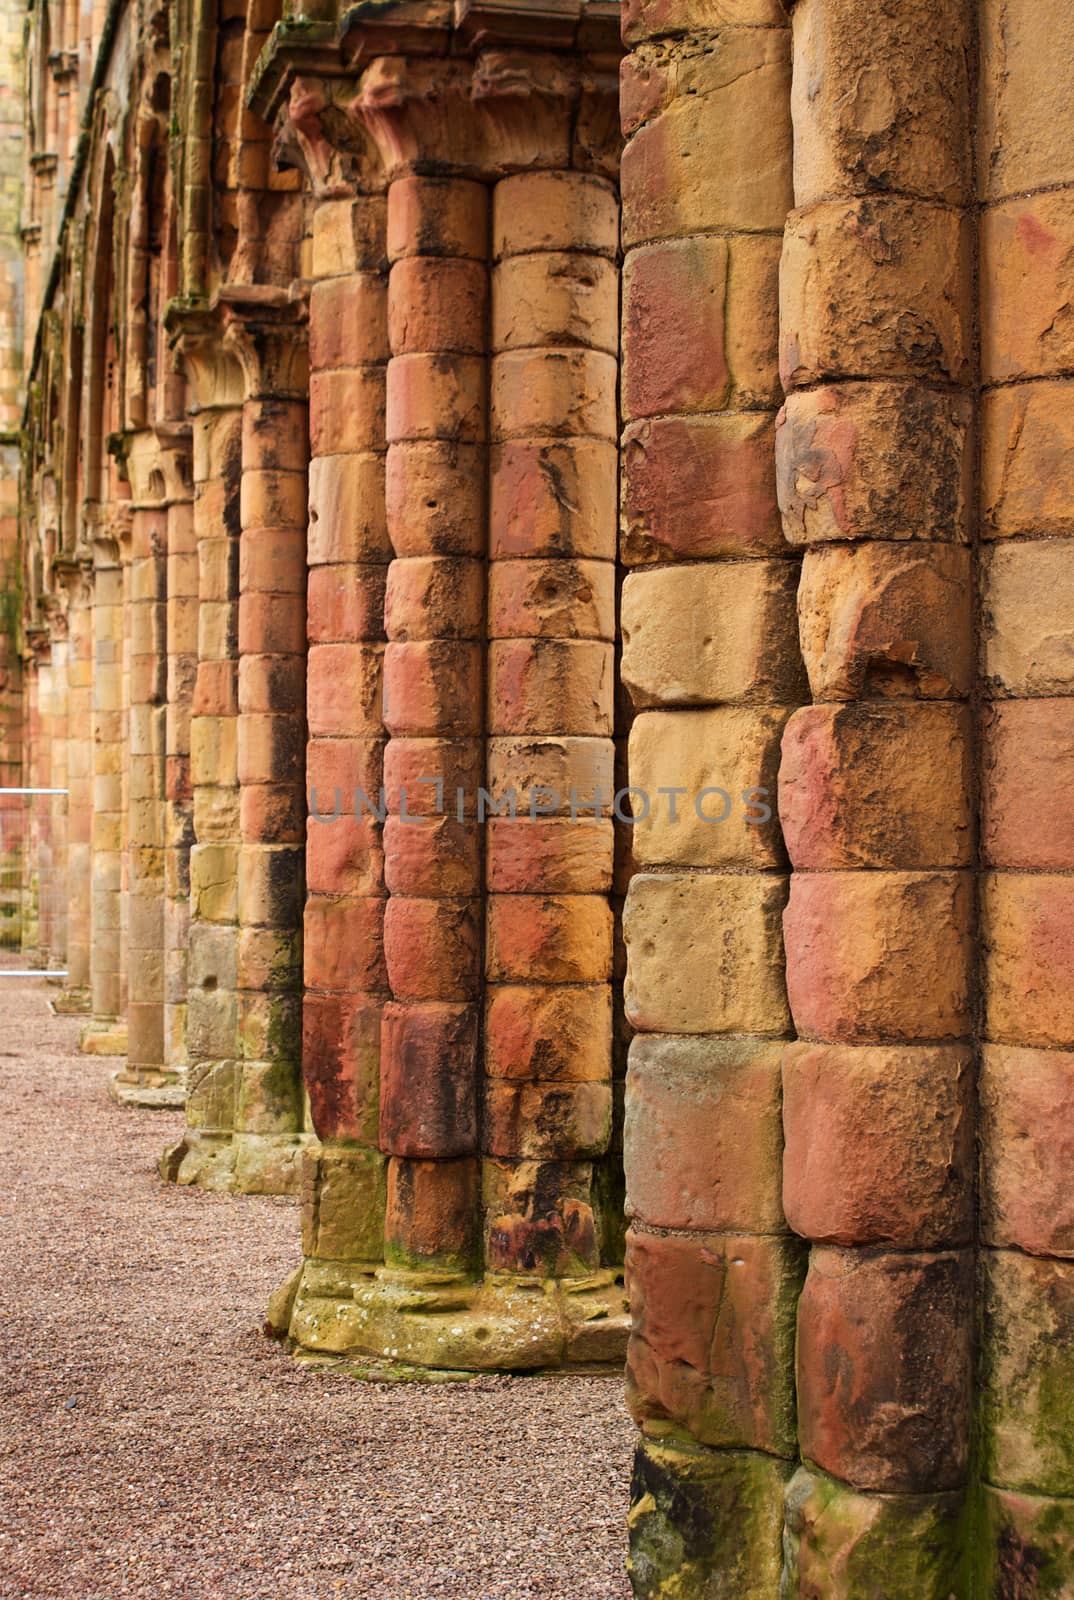 Jedburgh abbey - tourists attraction by javax